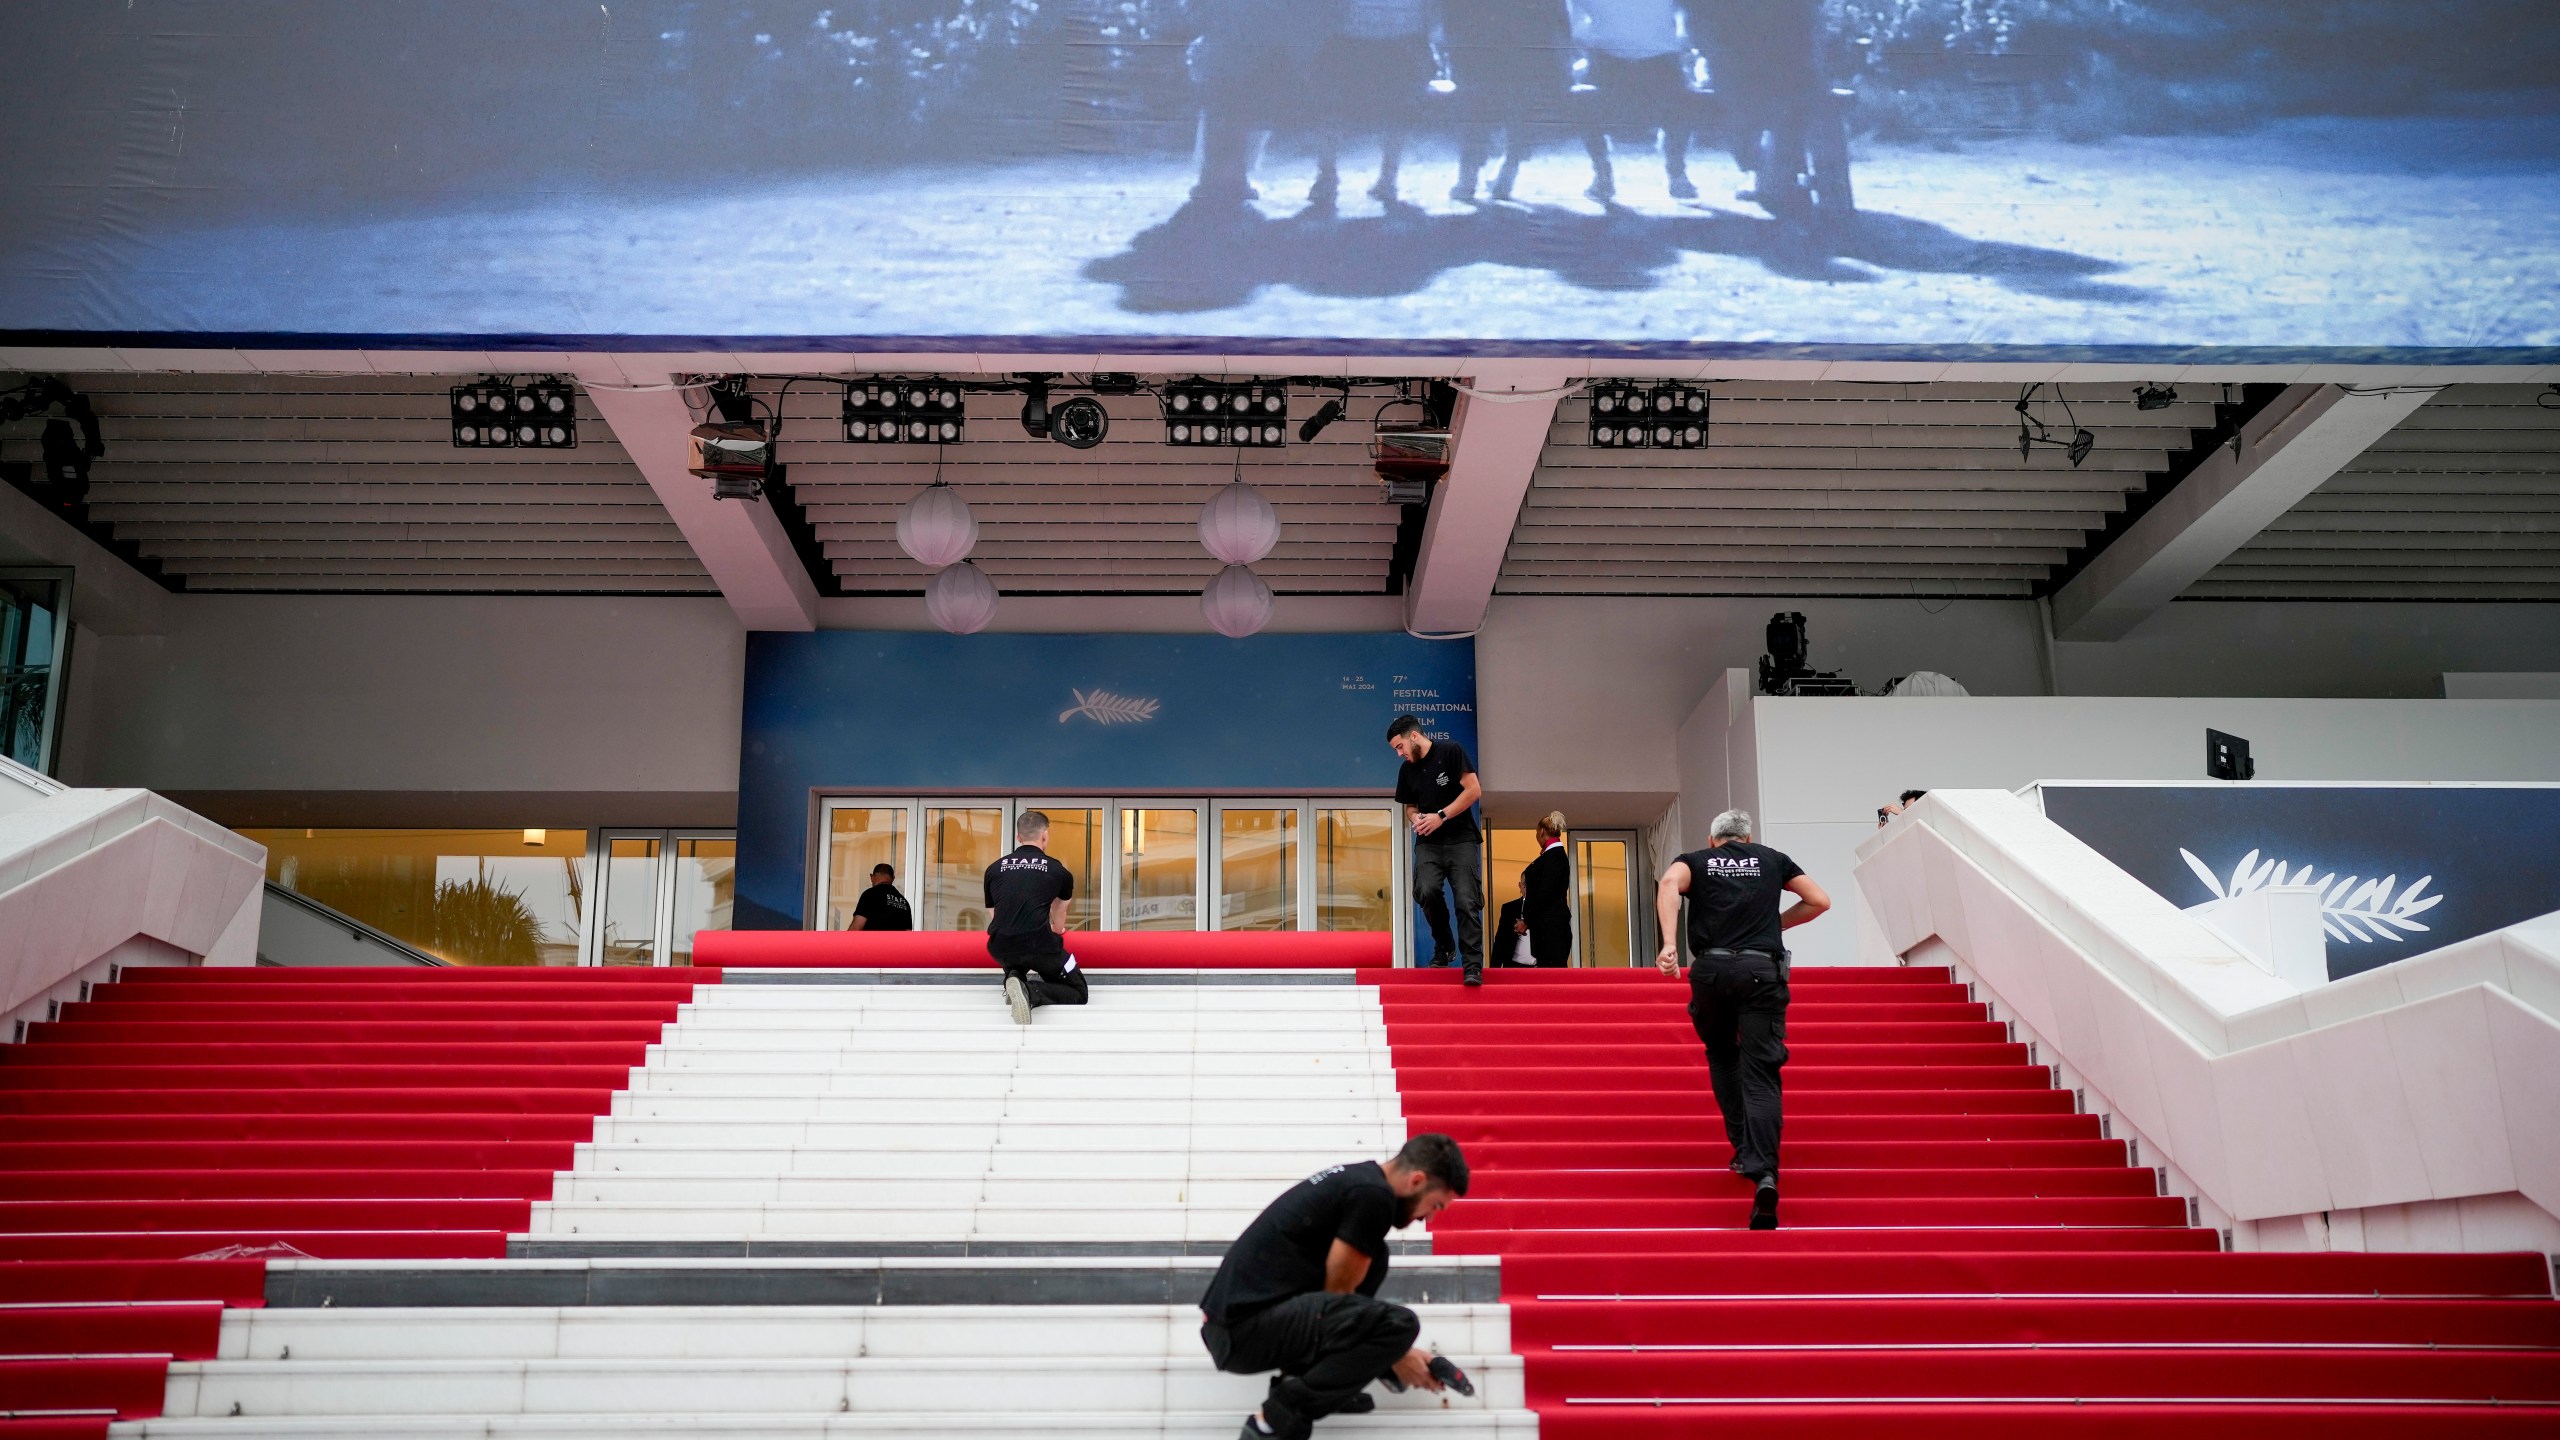 Festival workers lay the red carpet at the Palais des Festivals on opening day of the 77th international film festival, Cannes, southern France, Tuesday, May 14, 2024. The Cannes film festival runs from May 14 until May 25, 2024. (Photo by Andreea Alexandru/Invision/AP)